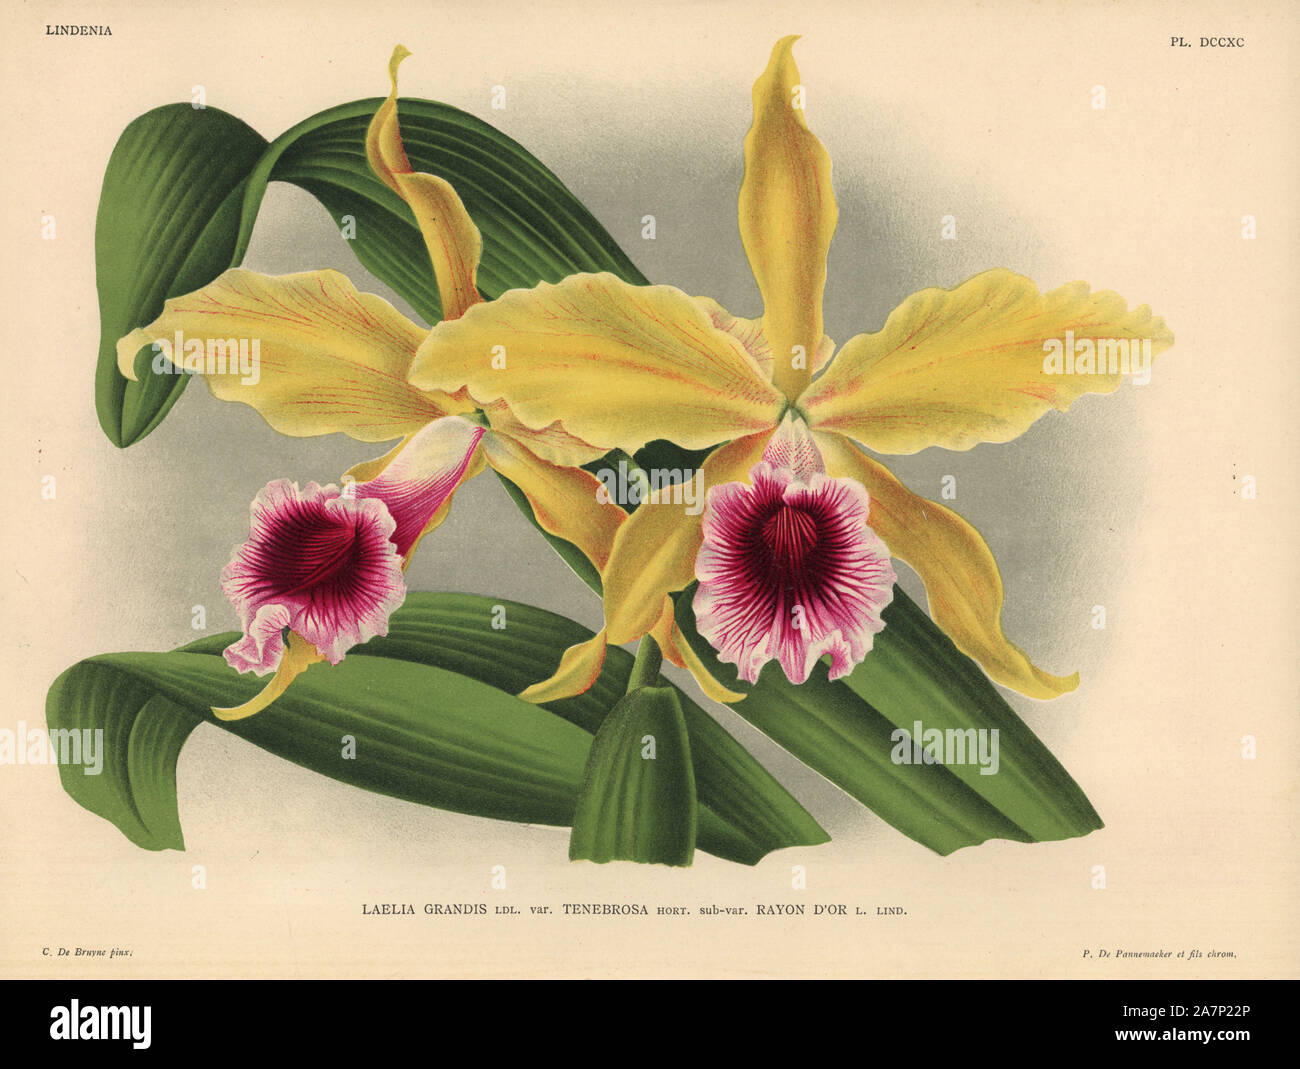 Rayon d'or sub-variety of Laelia grandis tenebrosa orchid. Illustration drawn by C. de Bruyne and chromolithographed by P. de Pannemaeker et fils from Lucien Linden's 'Lindenia, Iconographie des Orchidees,' Brussels, 1902. Stock Photo